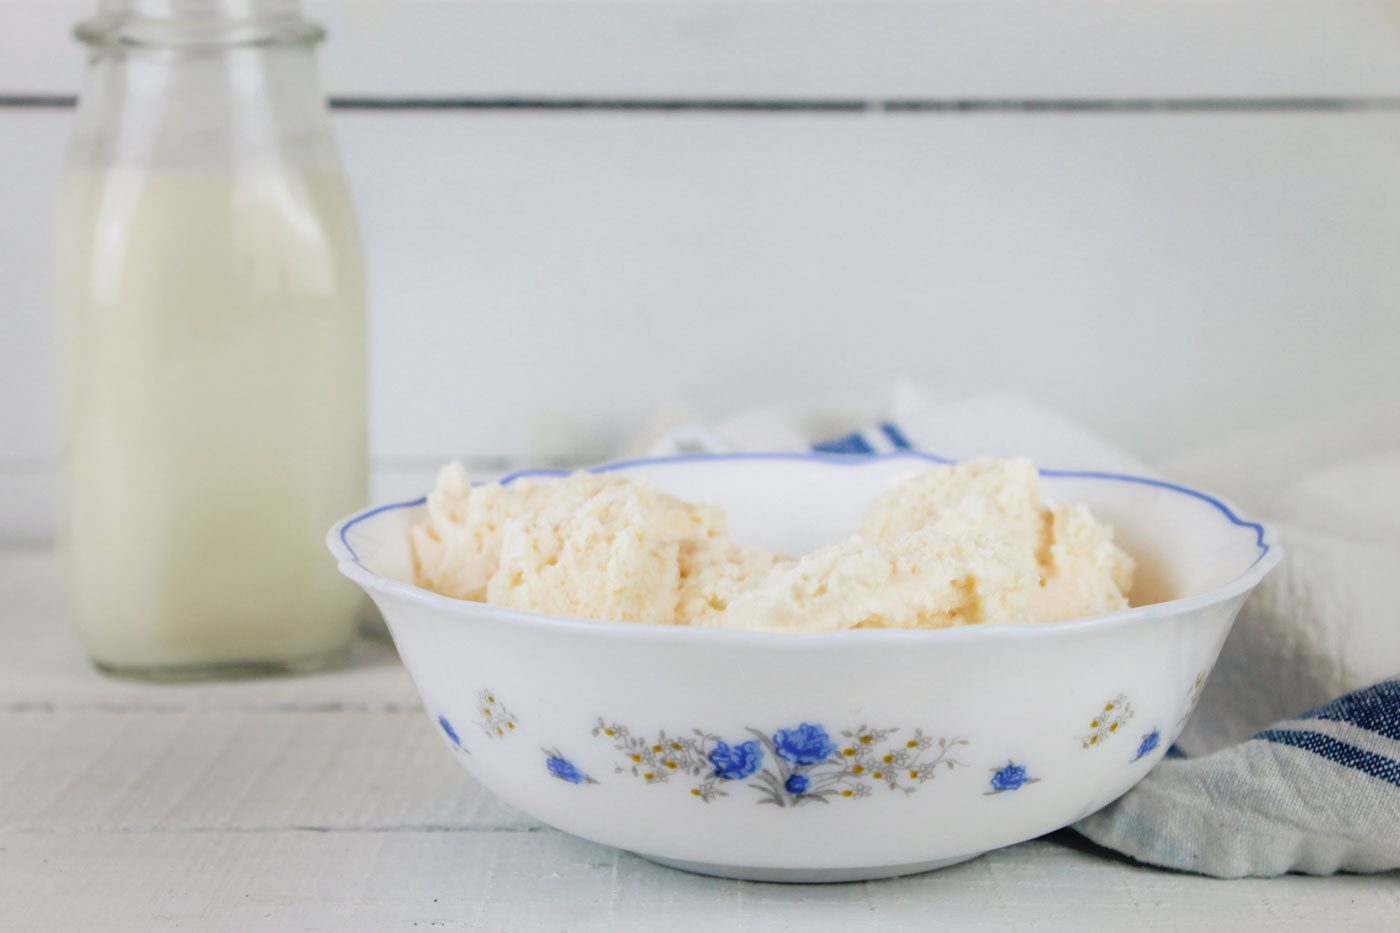 blue and white floral bowl full of homemade ice cream using raw milk